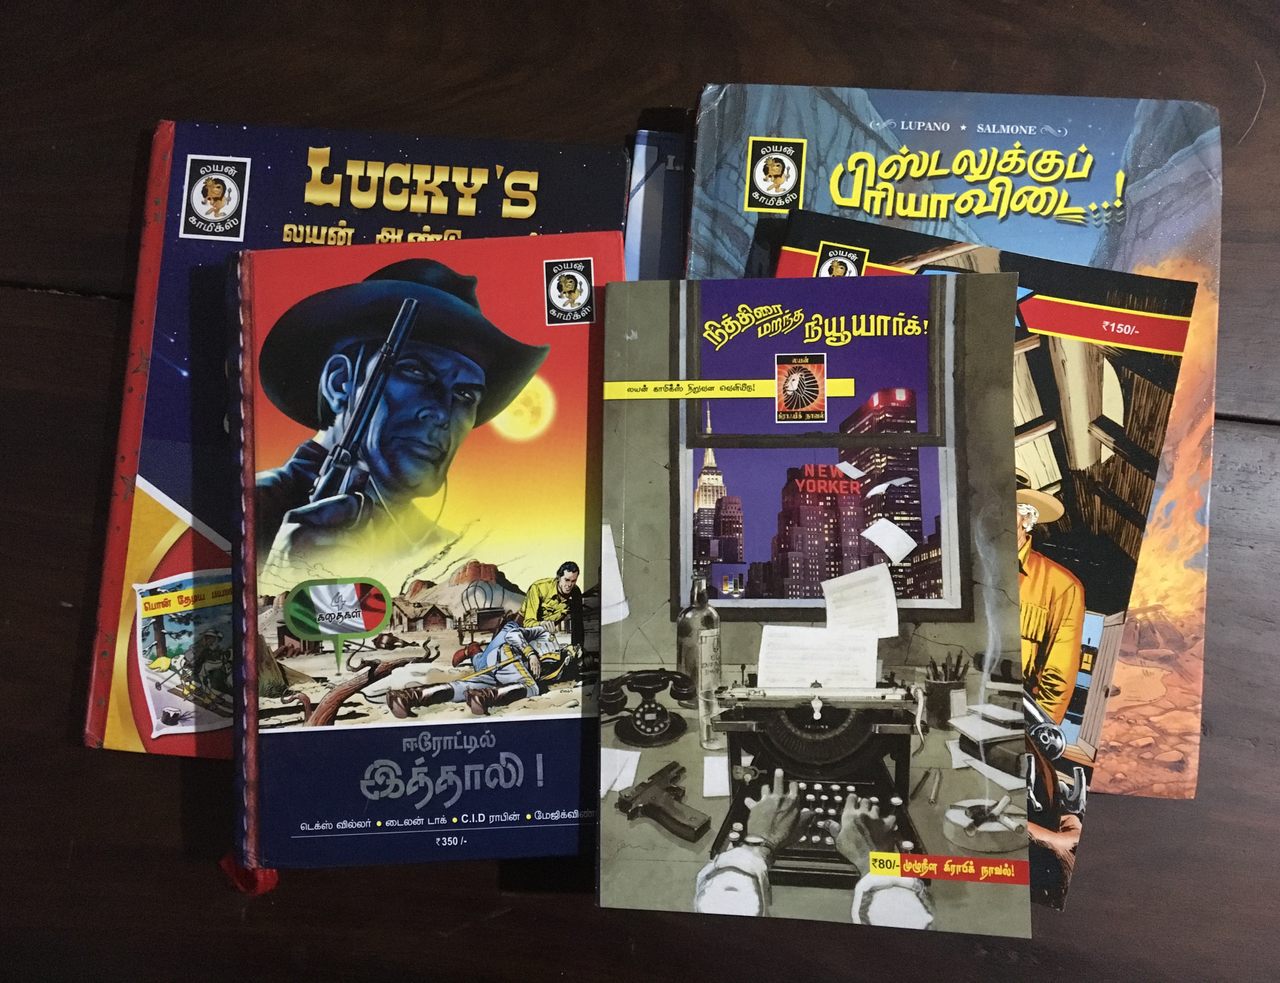 A selection of Tamil-language comics distributed by Lion-Muthu Comics.